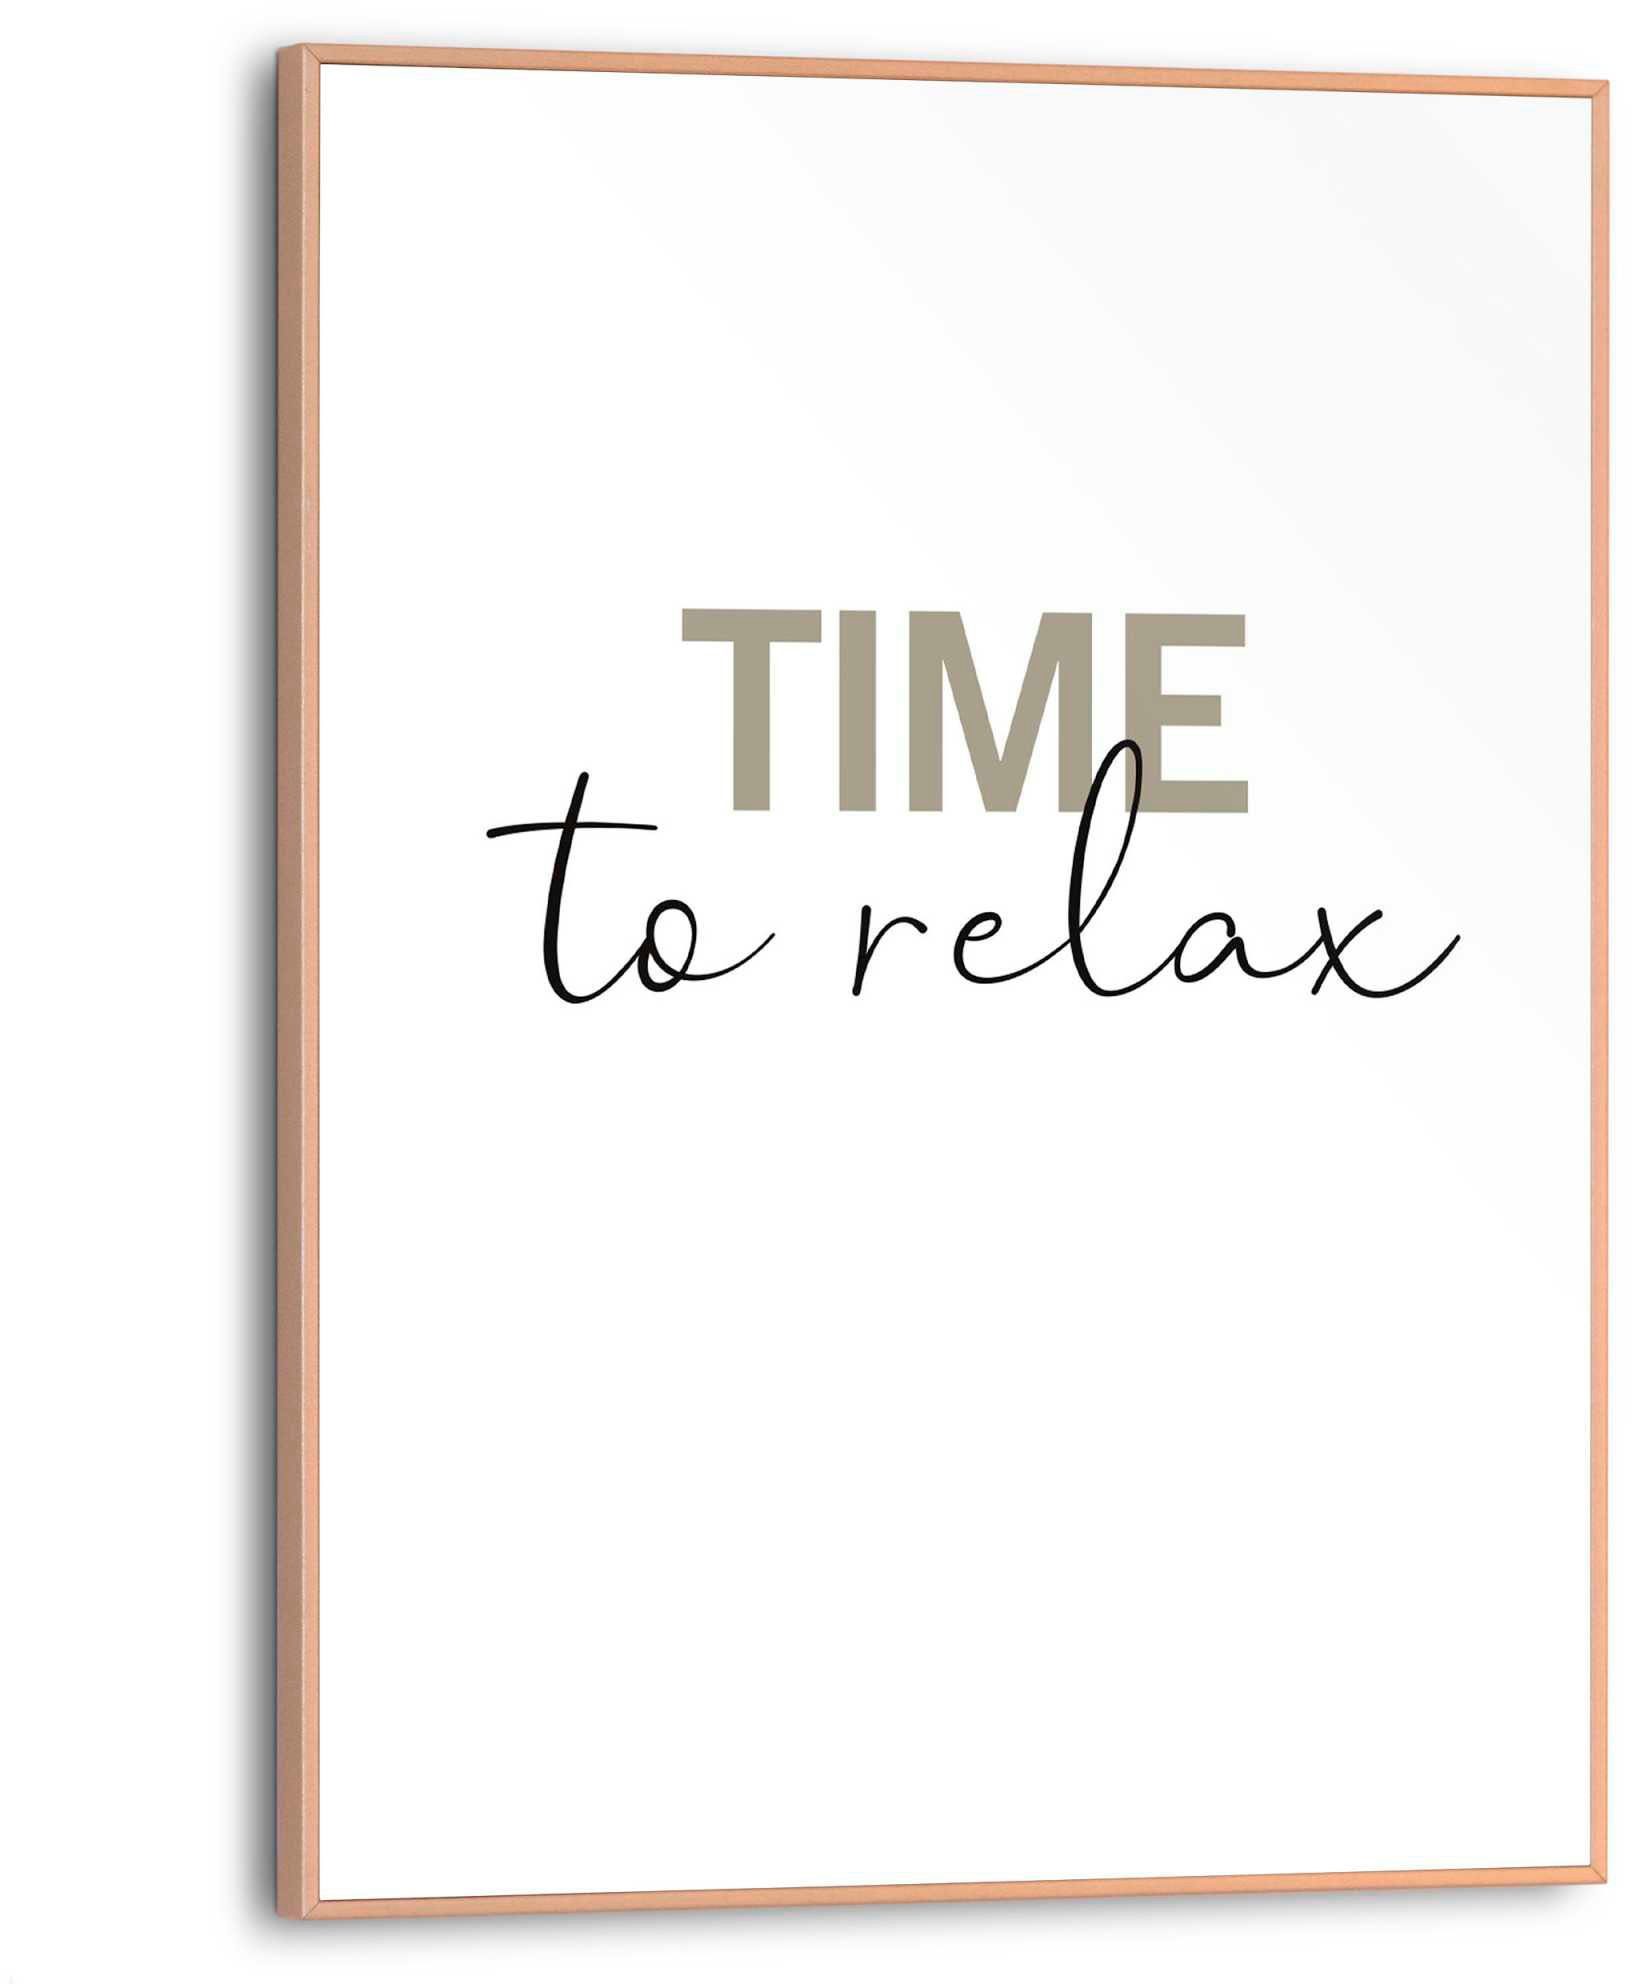 Time relax Poster to Reinders!